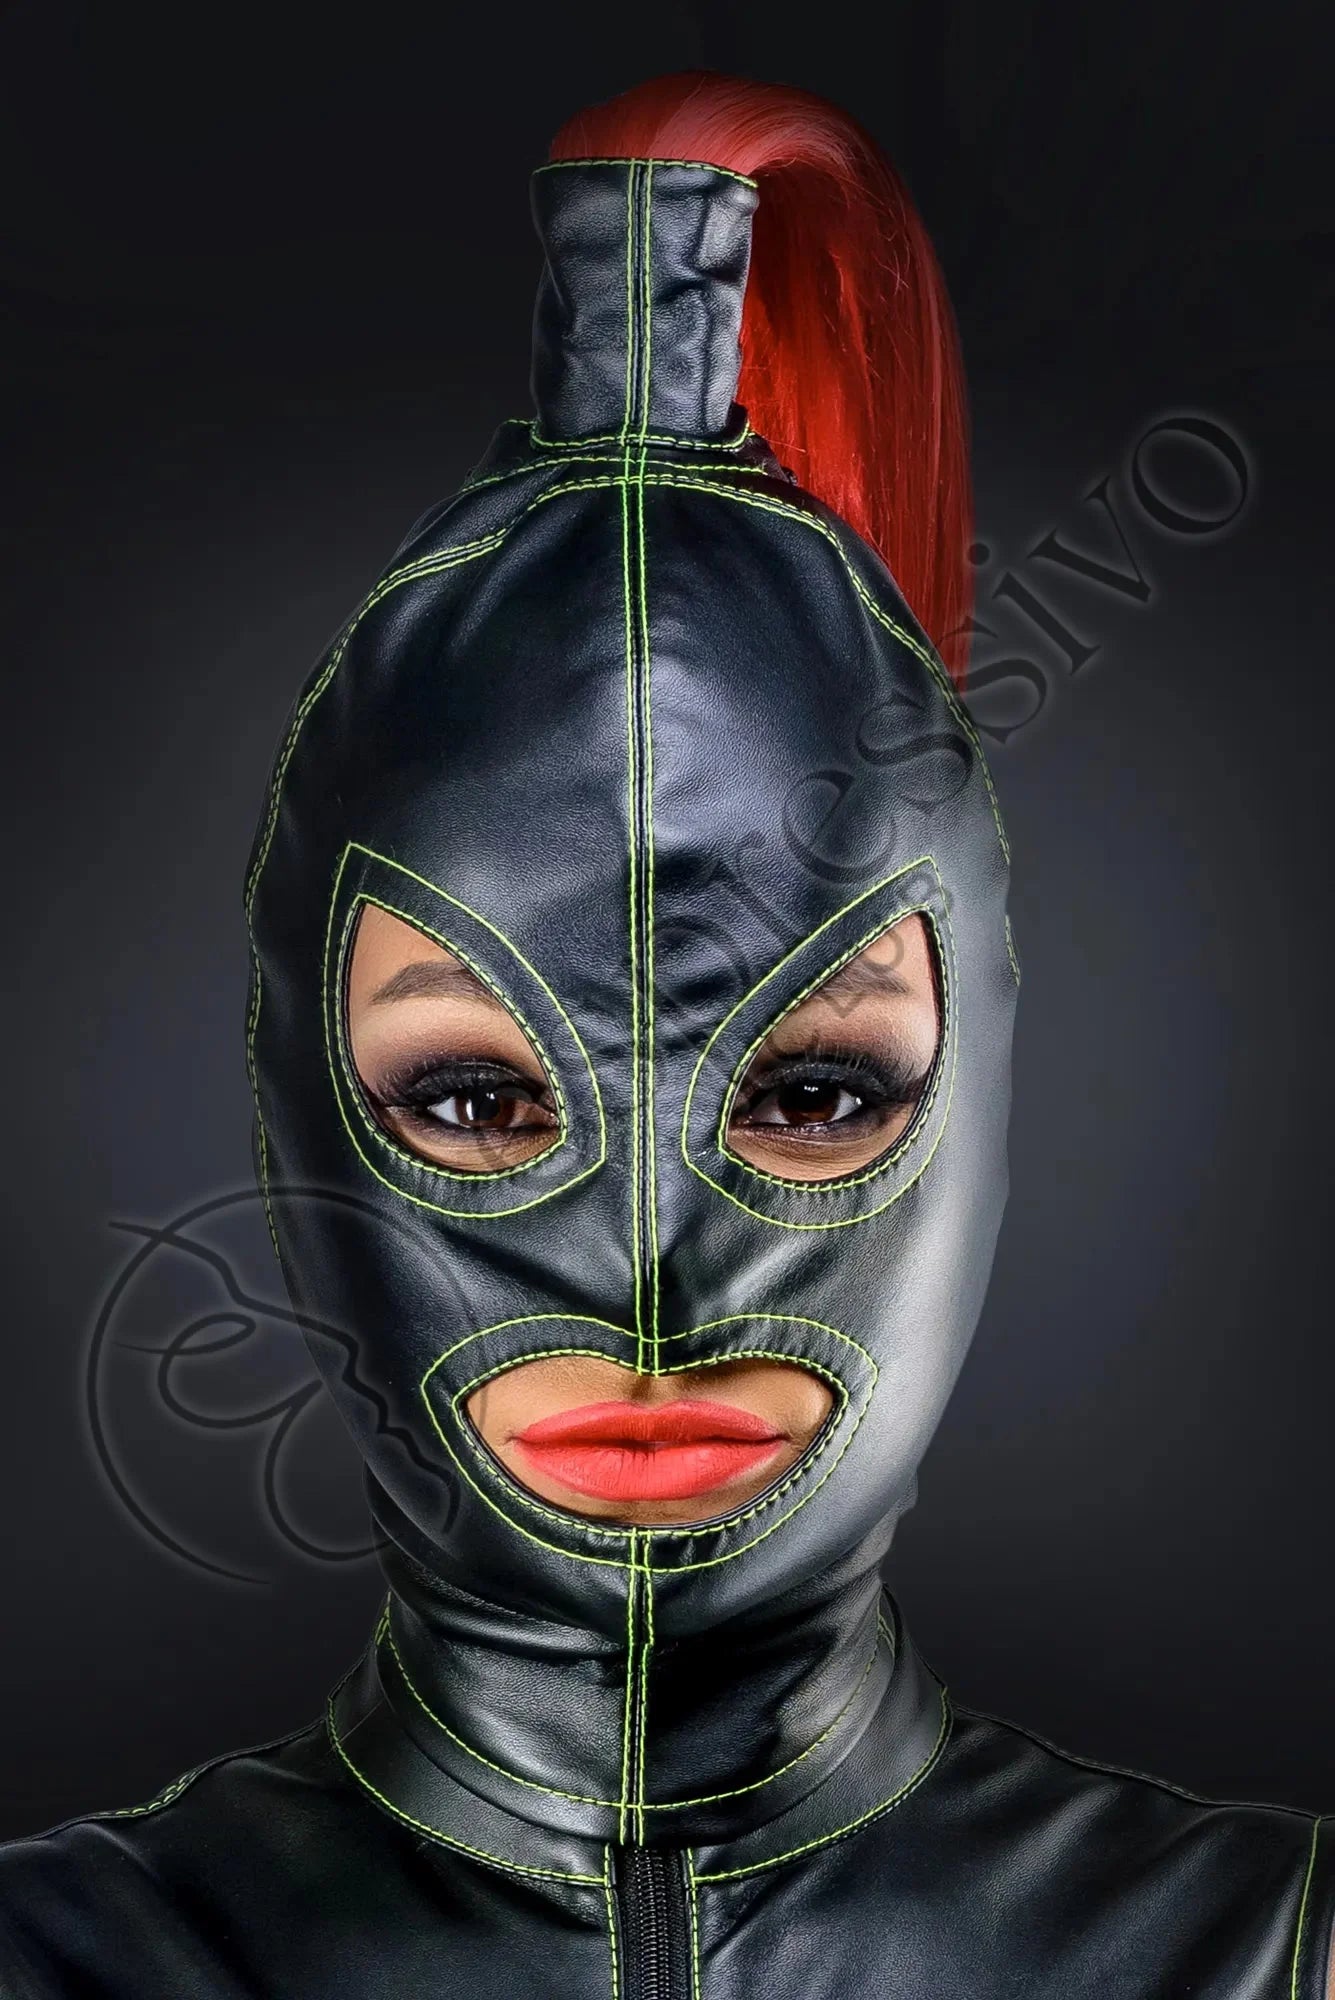 EspressivoClub Colored Delux Bdsm Ponytail Hood With Colored Thread Masks 112 Colored - 4